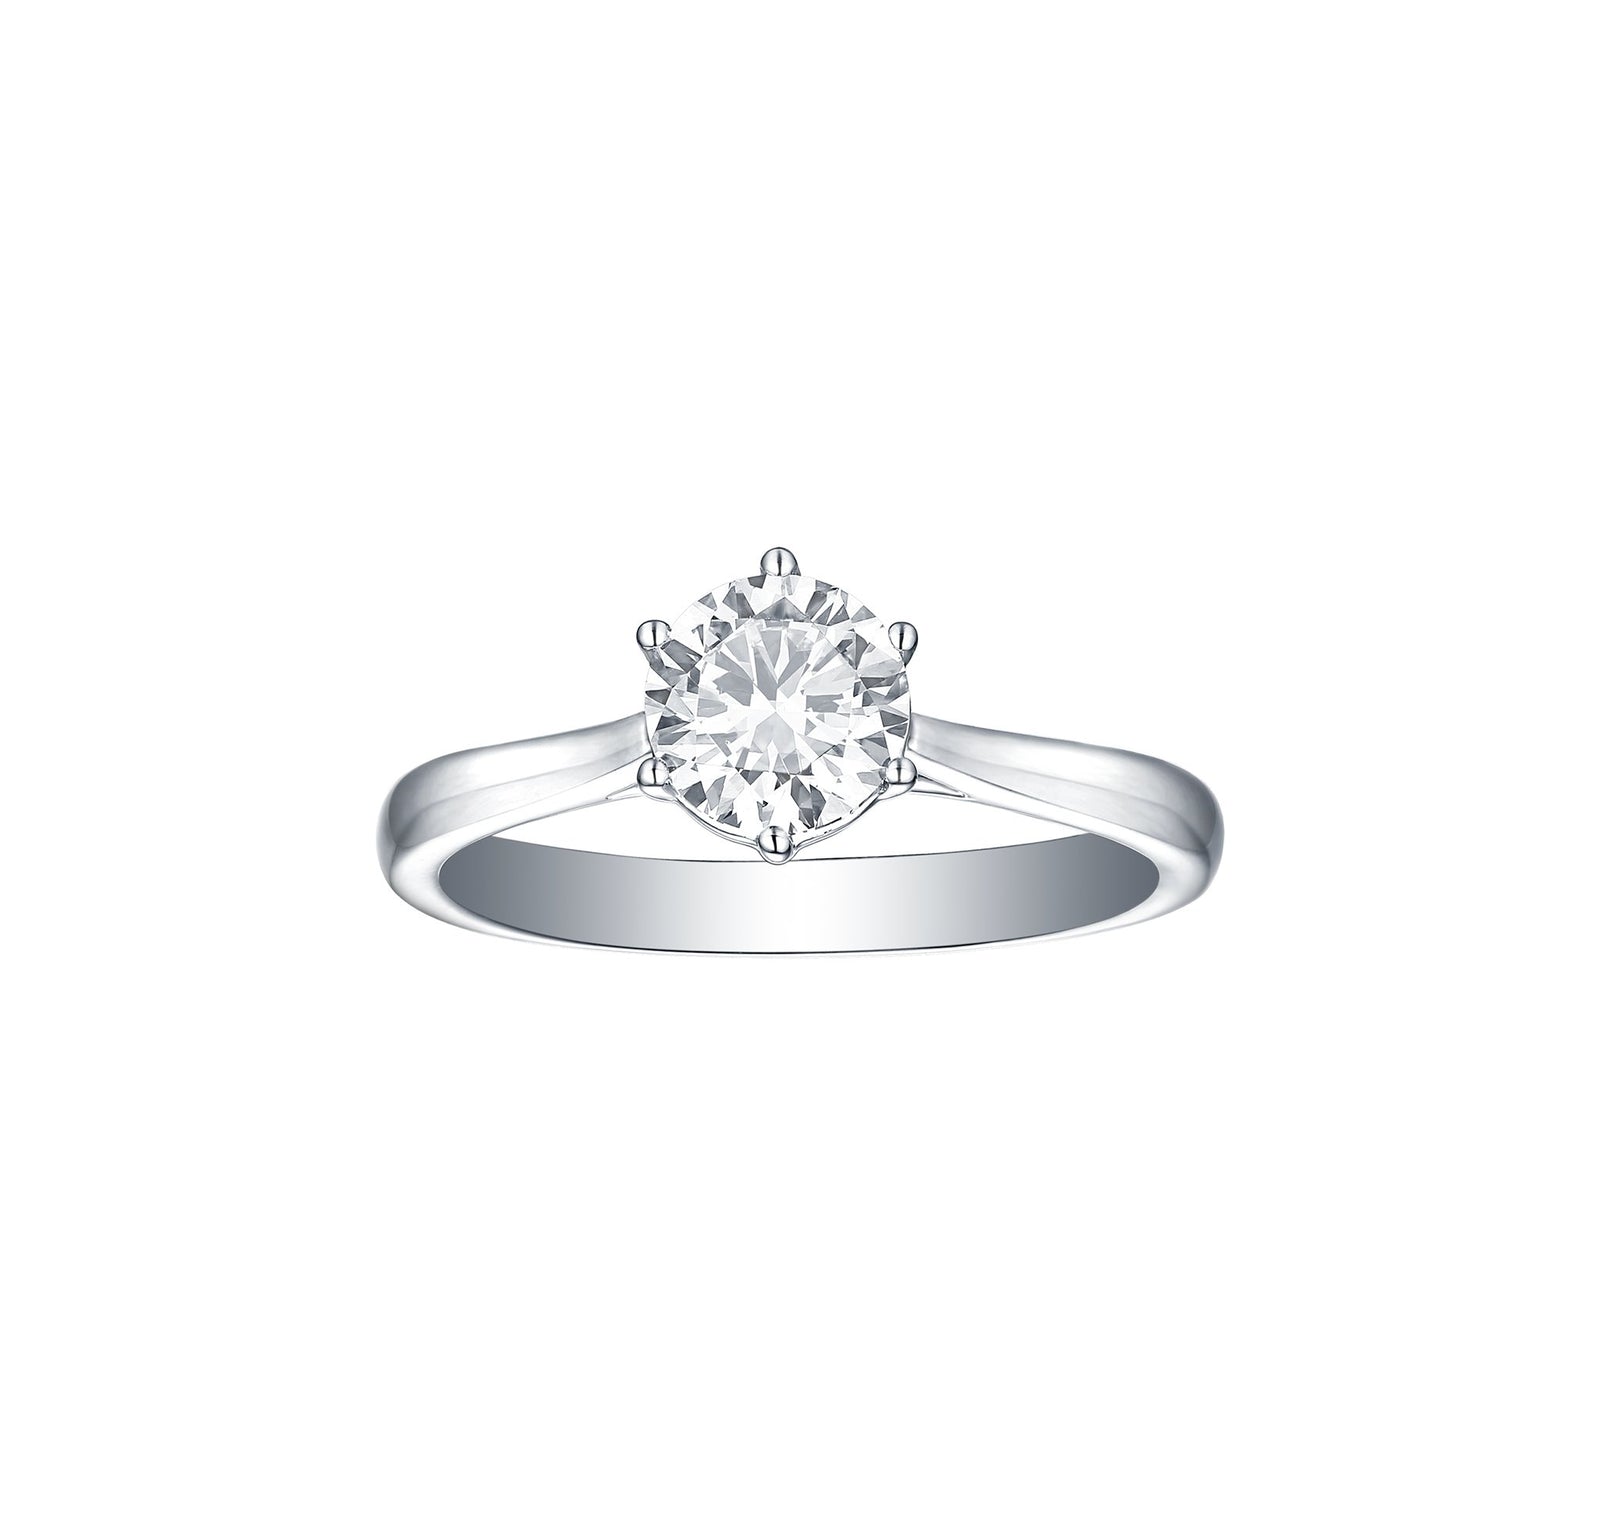 Engagement 1ct Solitaire Ring R-00047WHT